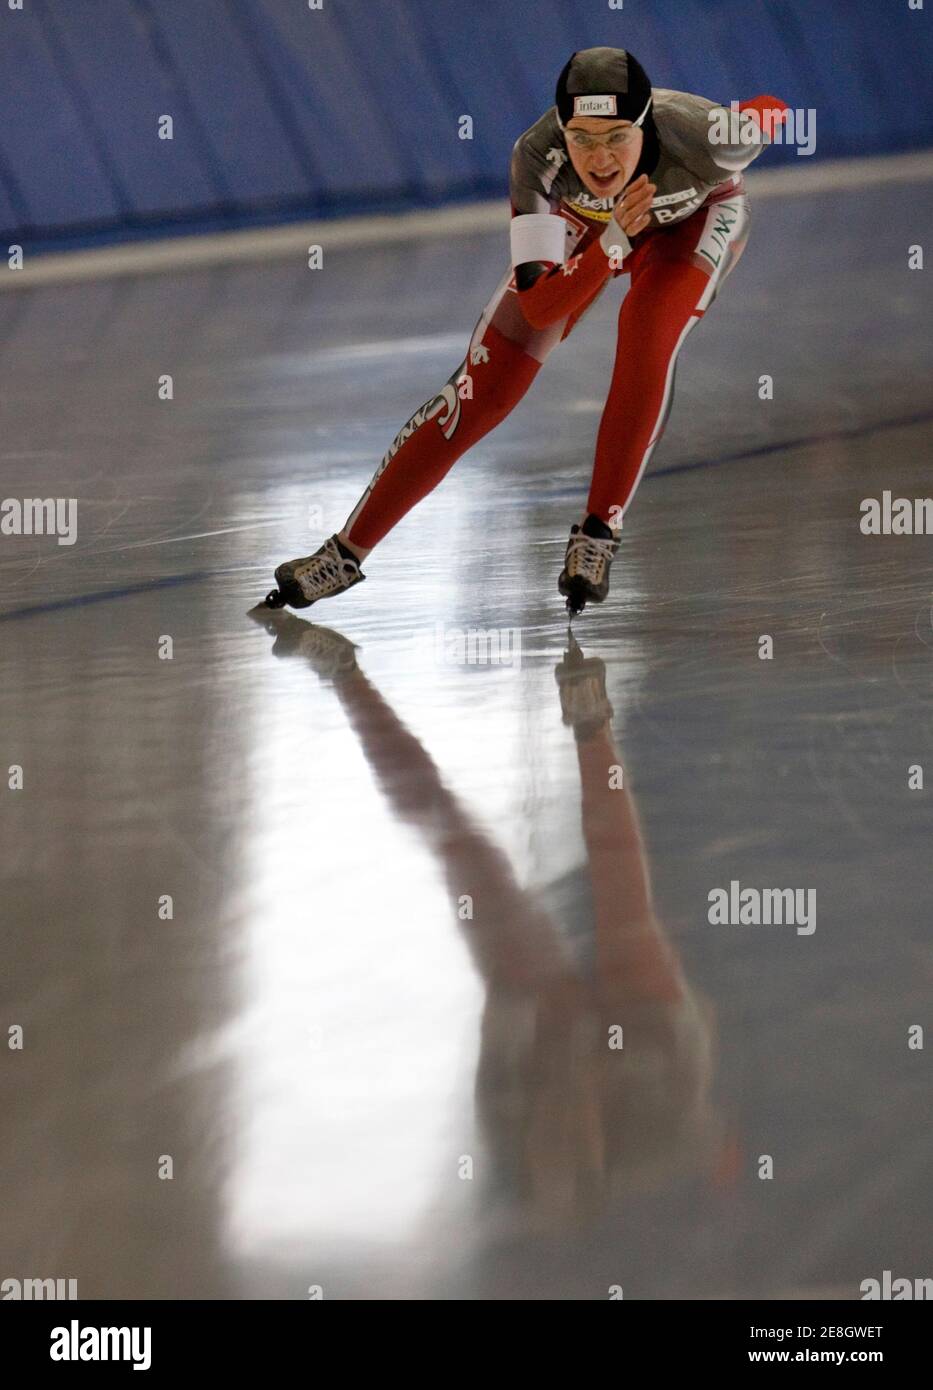 Canada's Clara Hughes competes in the 5,000-metre race during team speed skating trials at the Olympic Oval in Richmond, British Columbia October 20, 2009. The site will be the speed skating venue during the 2010 Olympic Winter Games.          REUTERS/Andy Clark     (CANADA SPORT OLYMPICS SPEED SKATING) Stock Photo